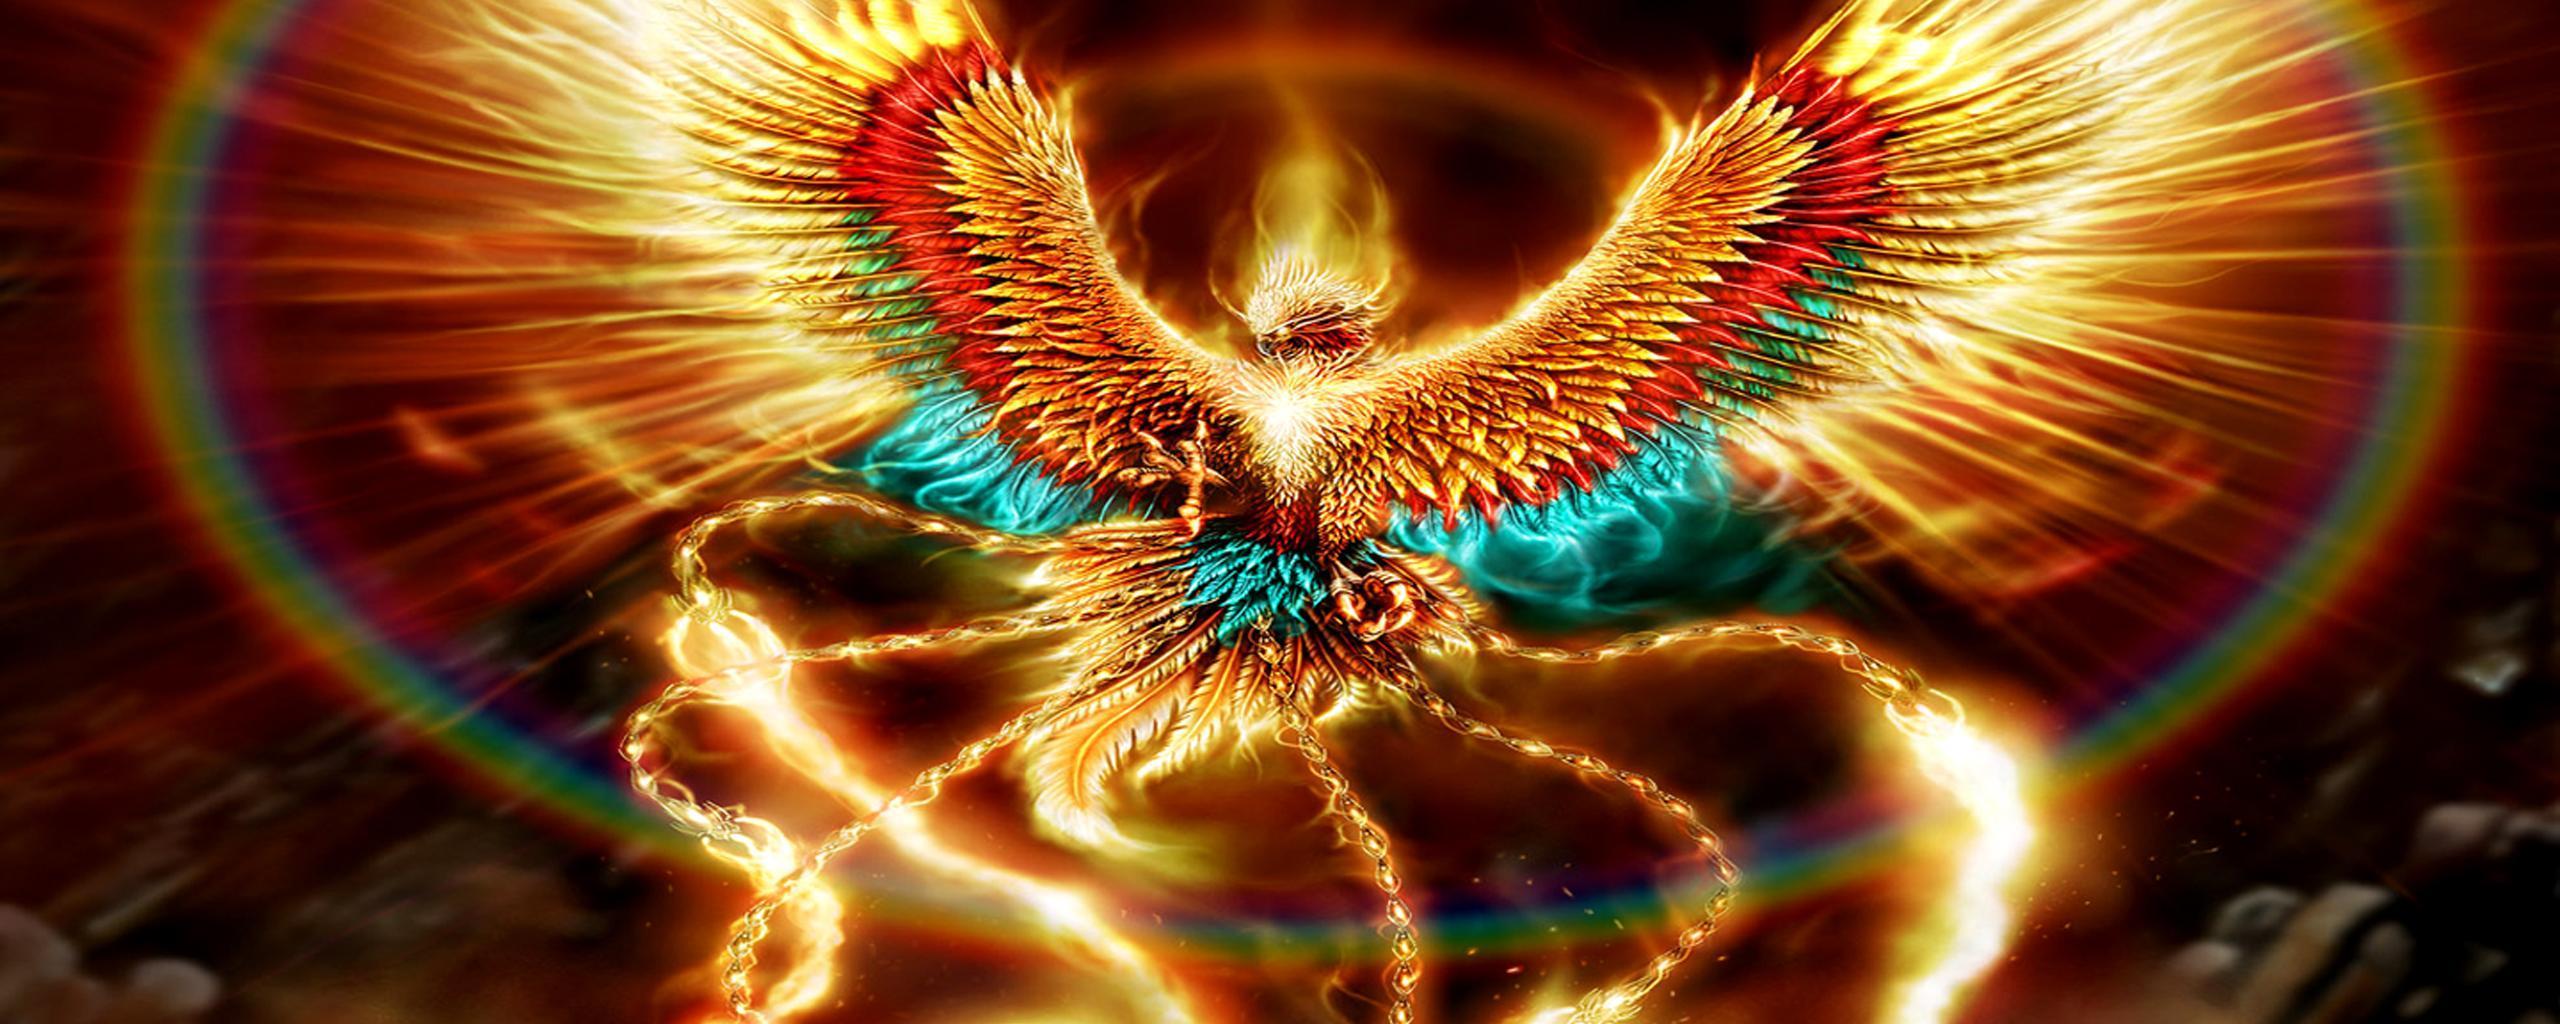 Dragons And Phoenix Rising From Ashes Wallpapers - Wallpaper Cave